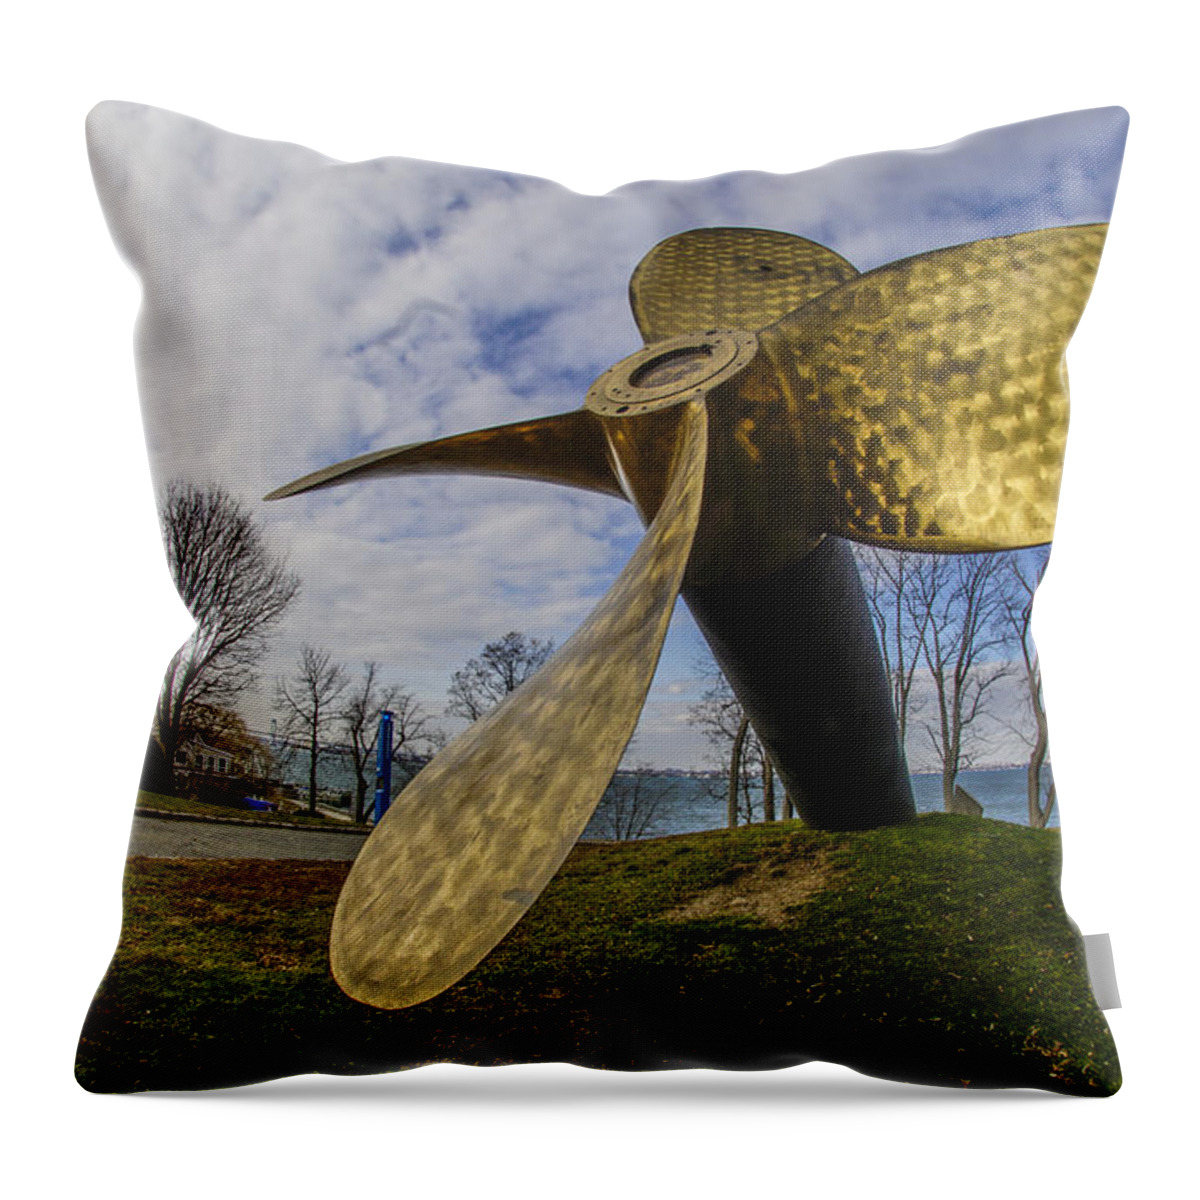 Propeller Throw Pillow featuring the photograph Propeller by Roni Chastain